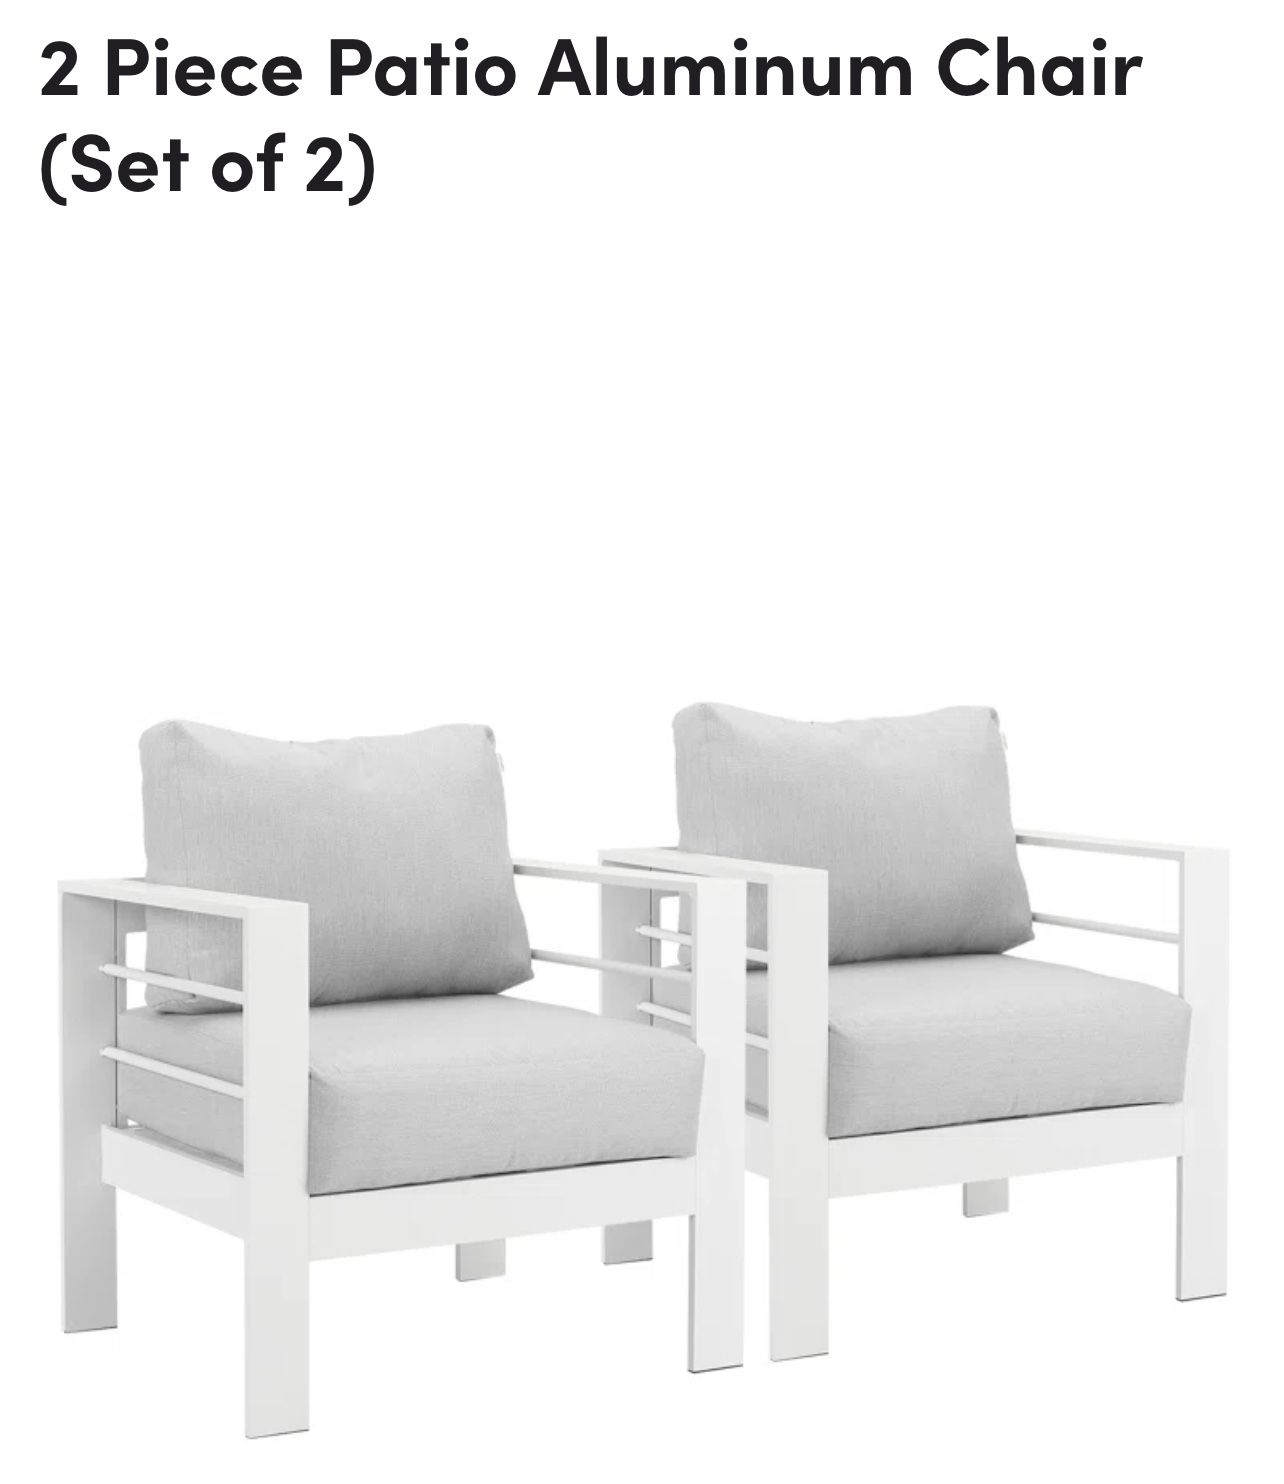 2 Piece Patio Club Chair (Set of 2) Gray & White! New AND Assembled!